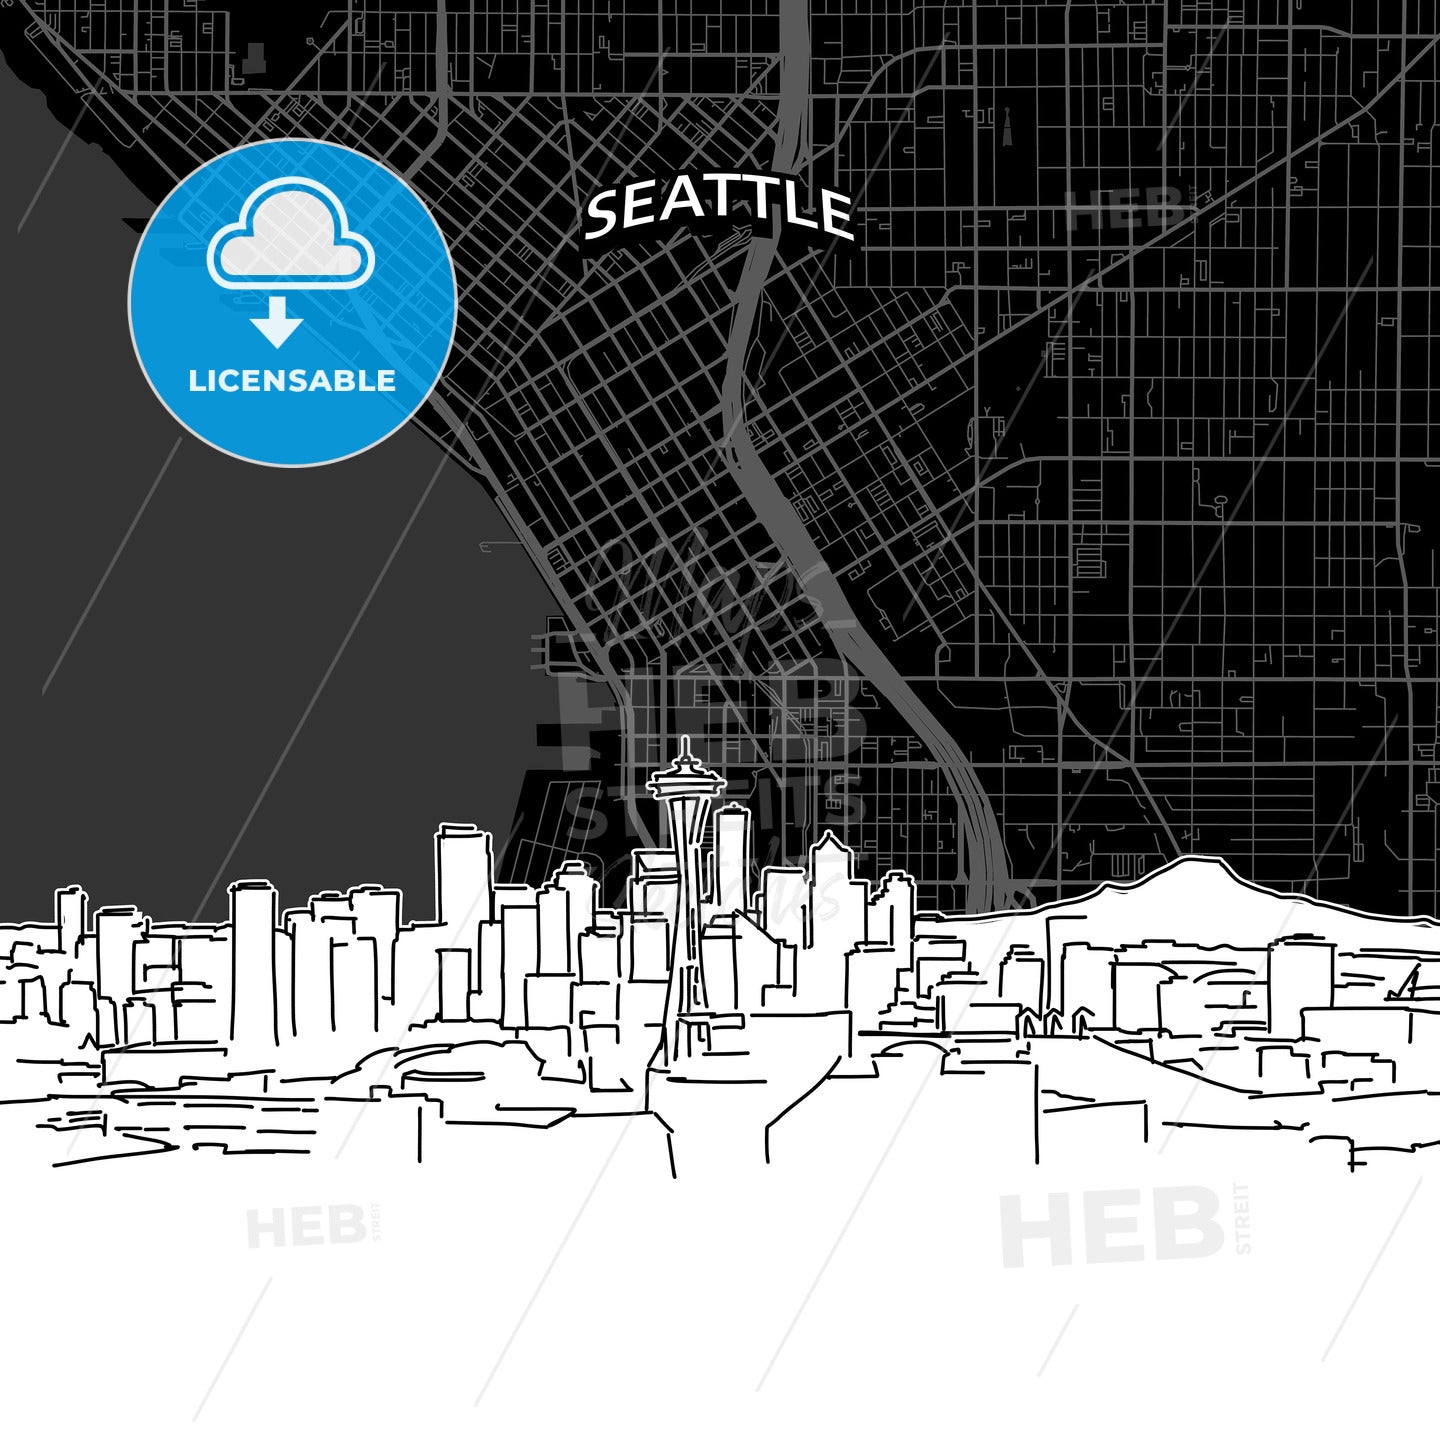 Seattle skyline with map